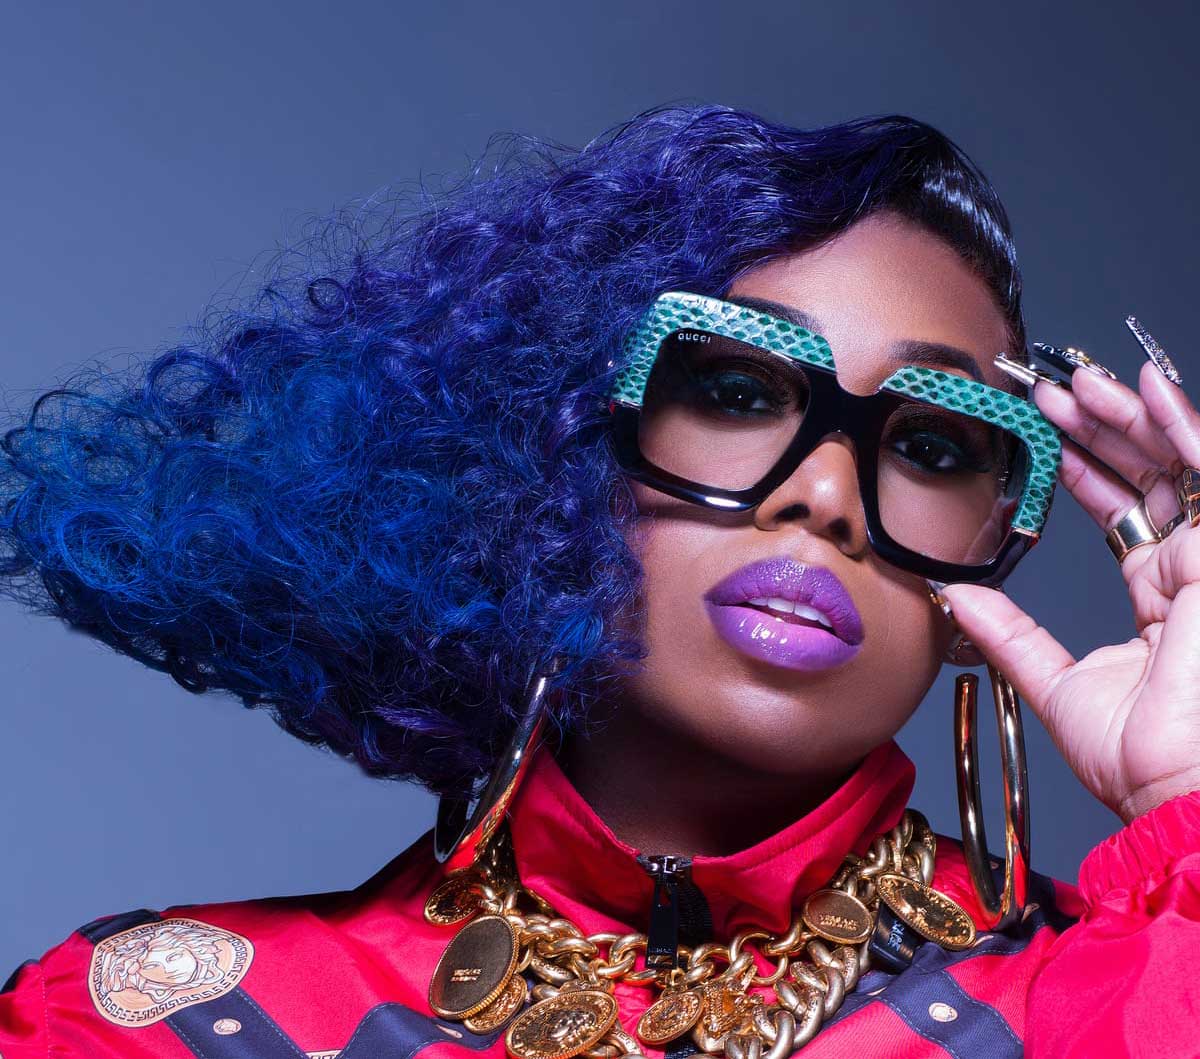 scusa relè Federale top 10 female rappers of all time disgustoso ...